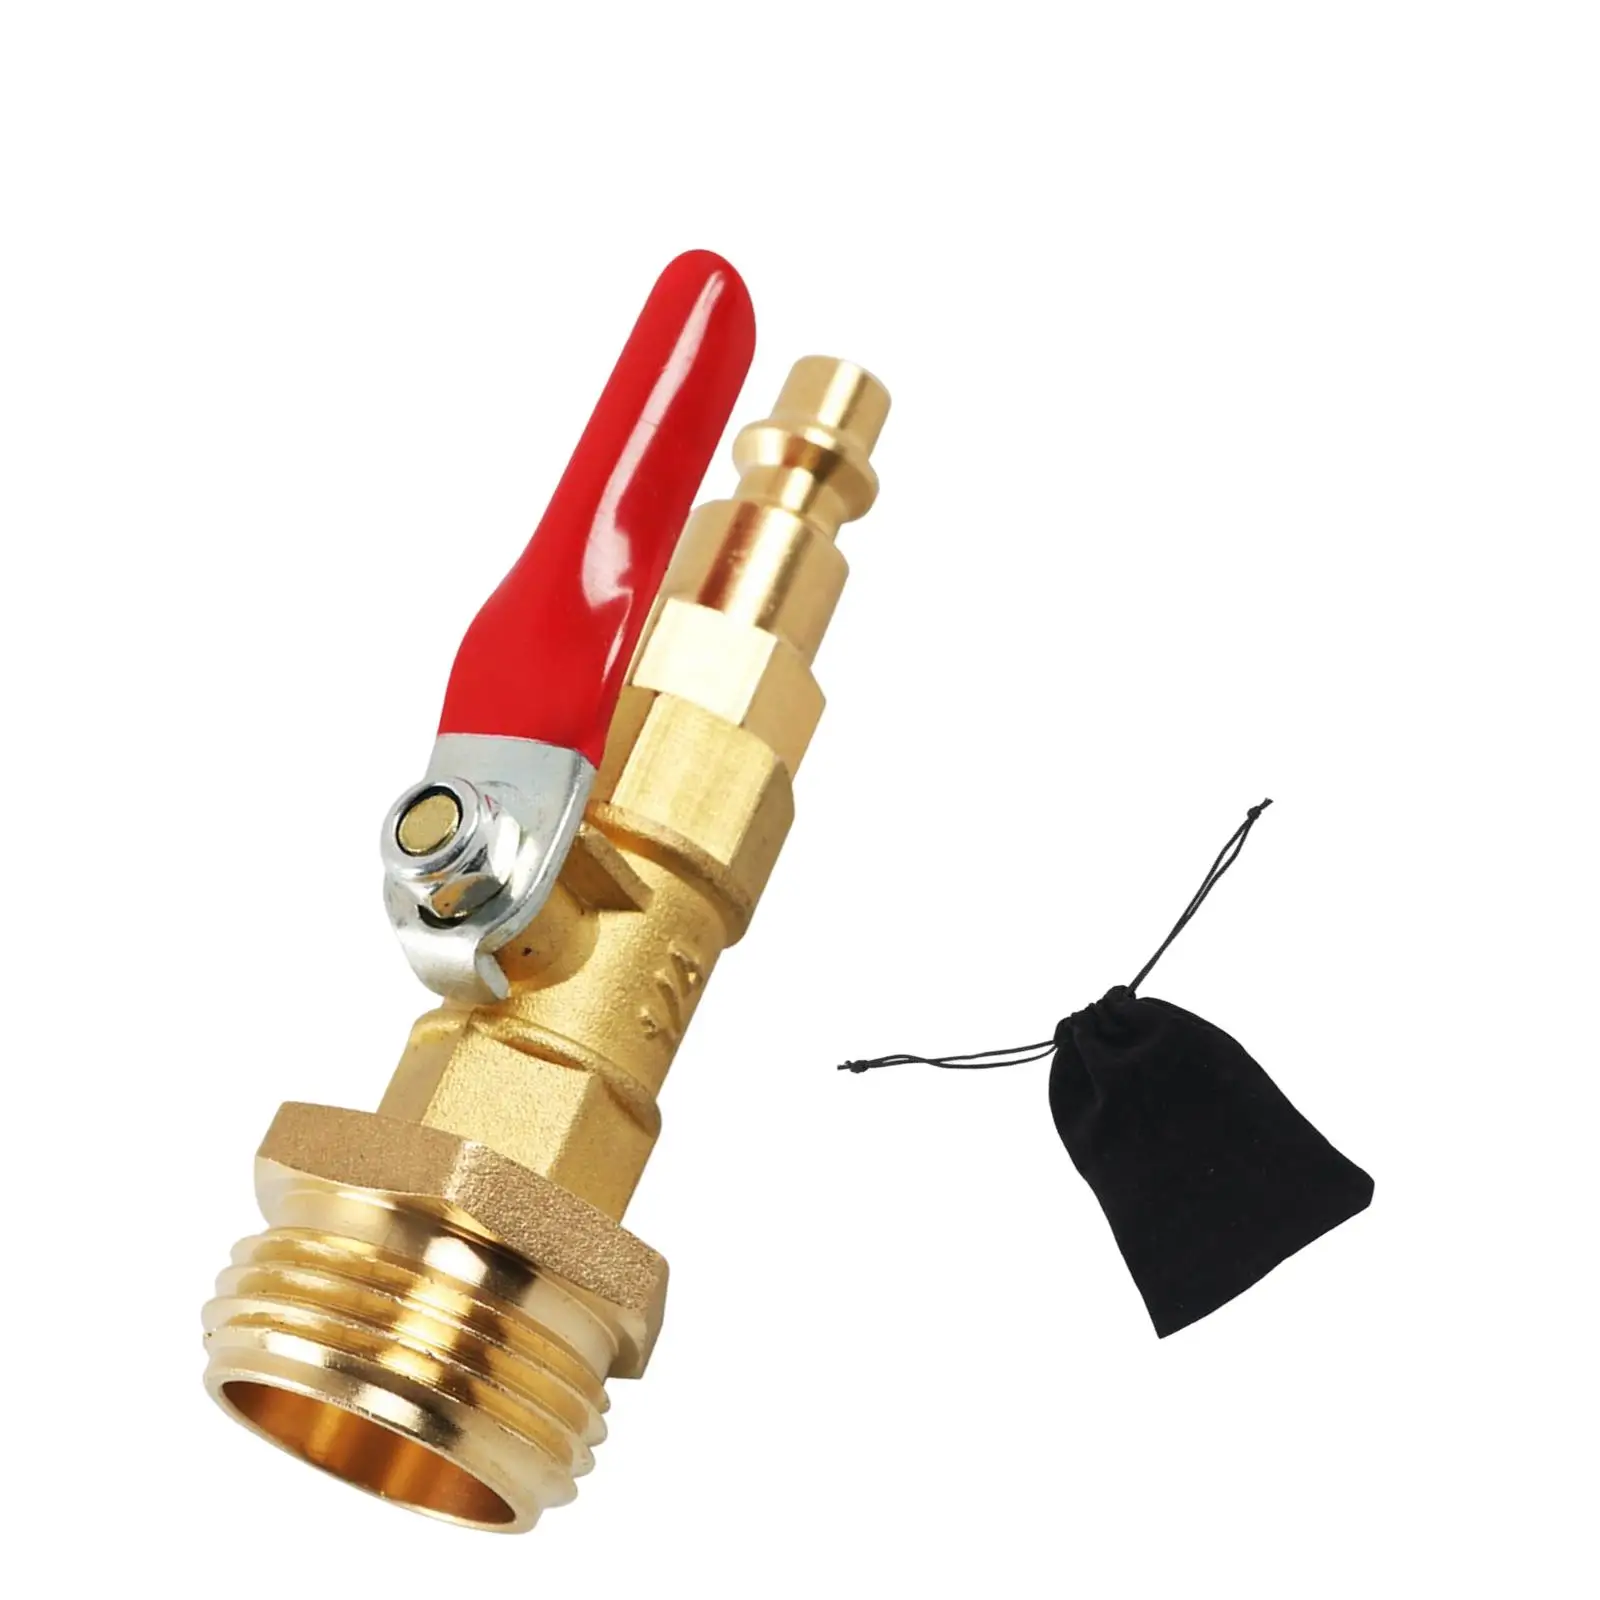 Winterize Blowout Adapter with 1/4 inch Male Quick Plug Brass Made Garden Hose Quick Connecting Plug for RV with Ball Valve